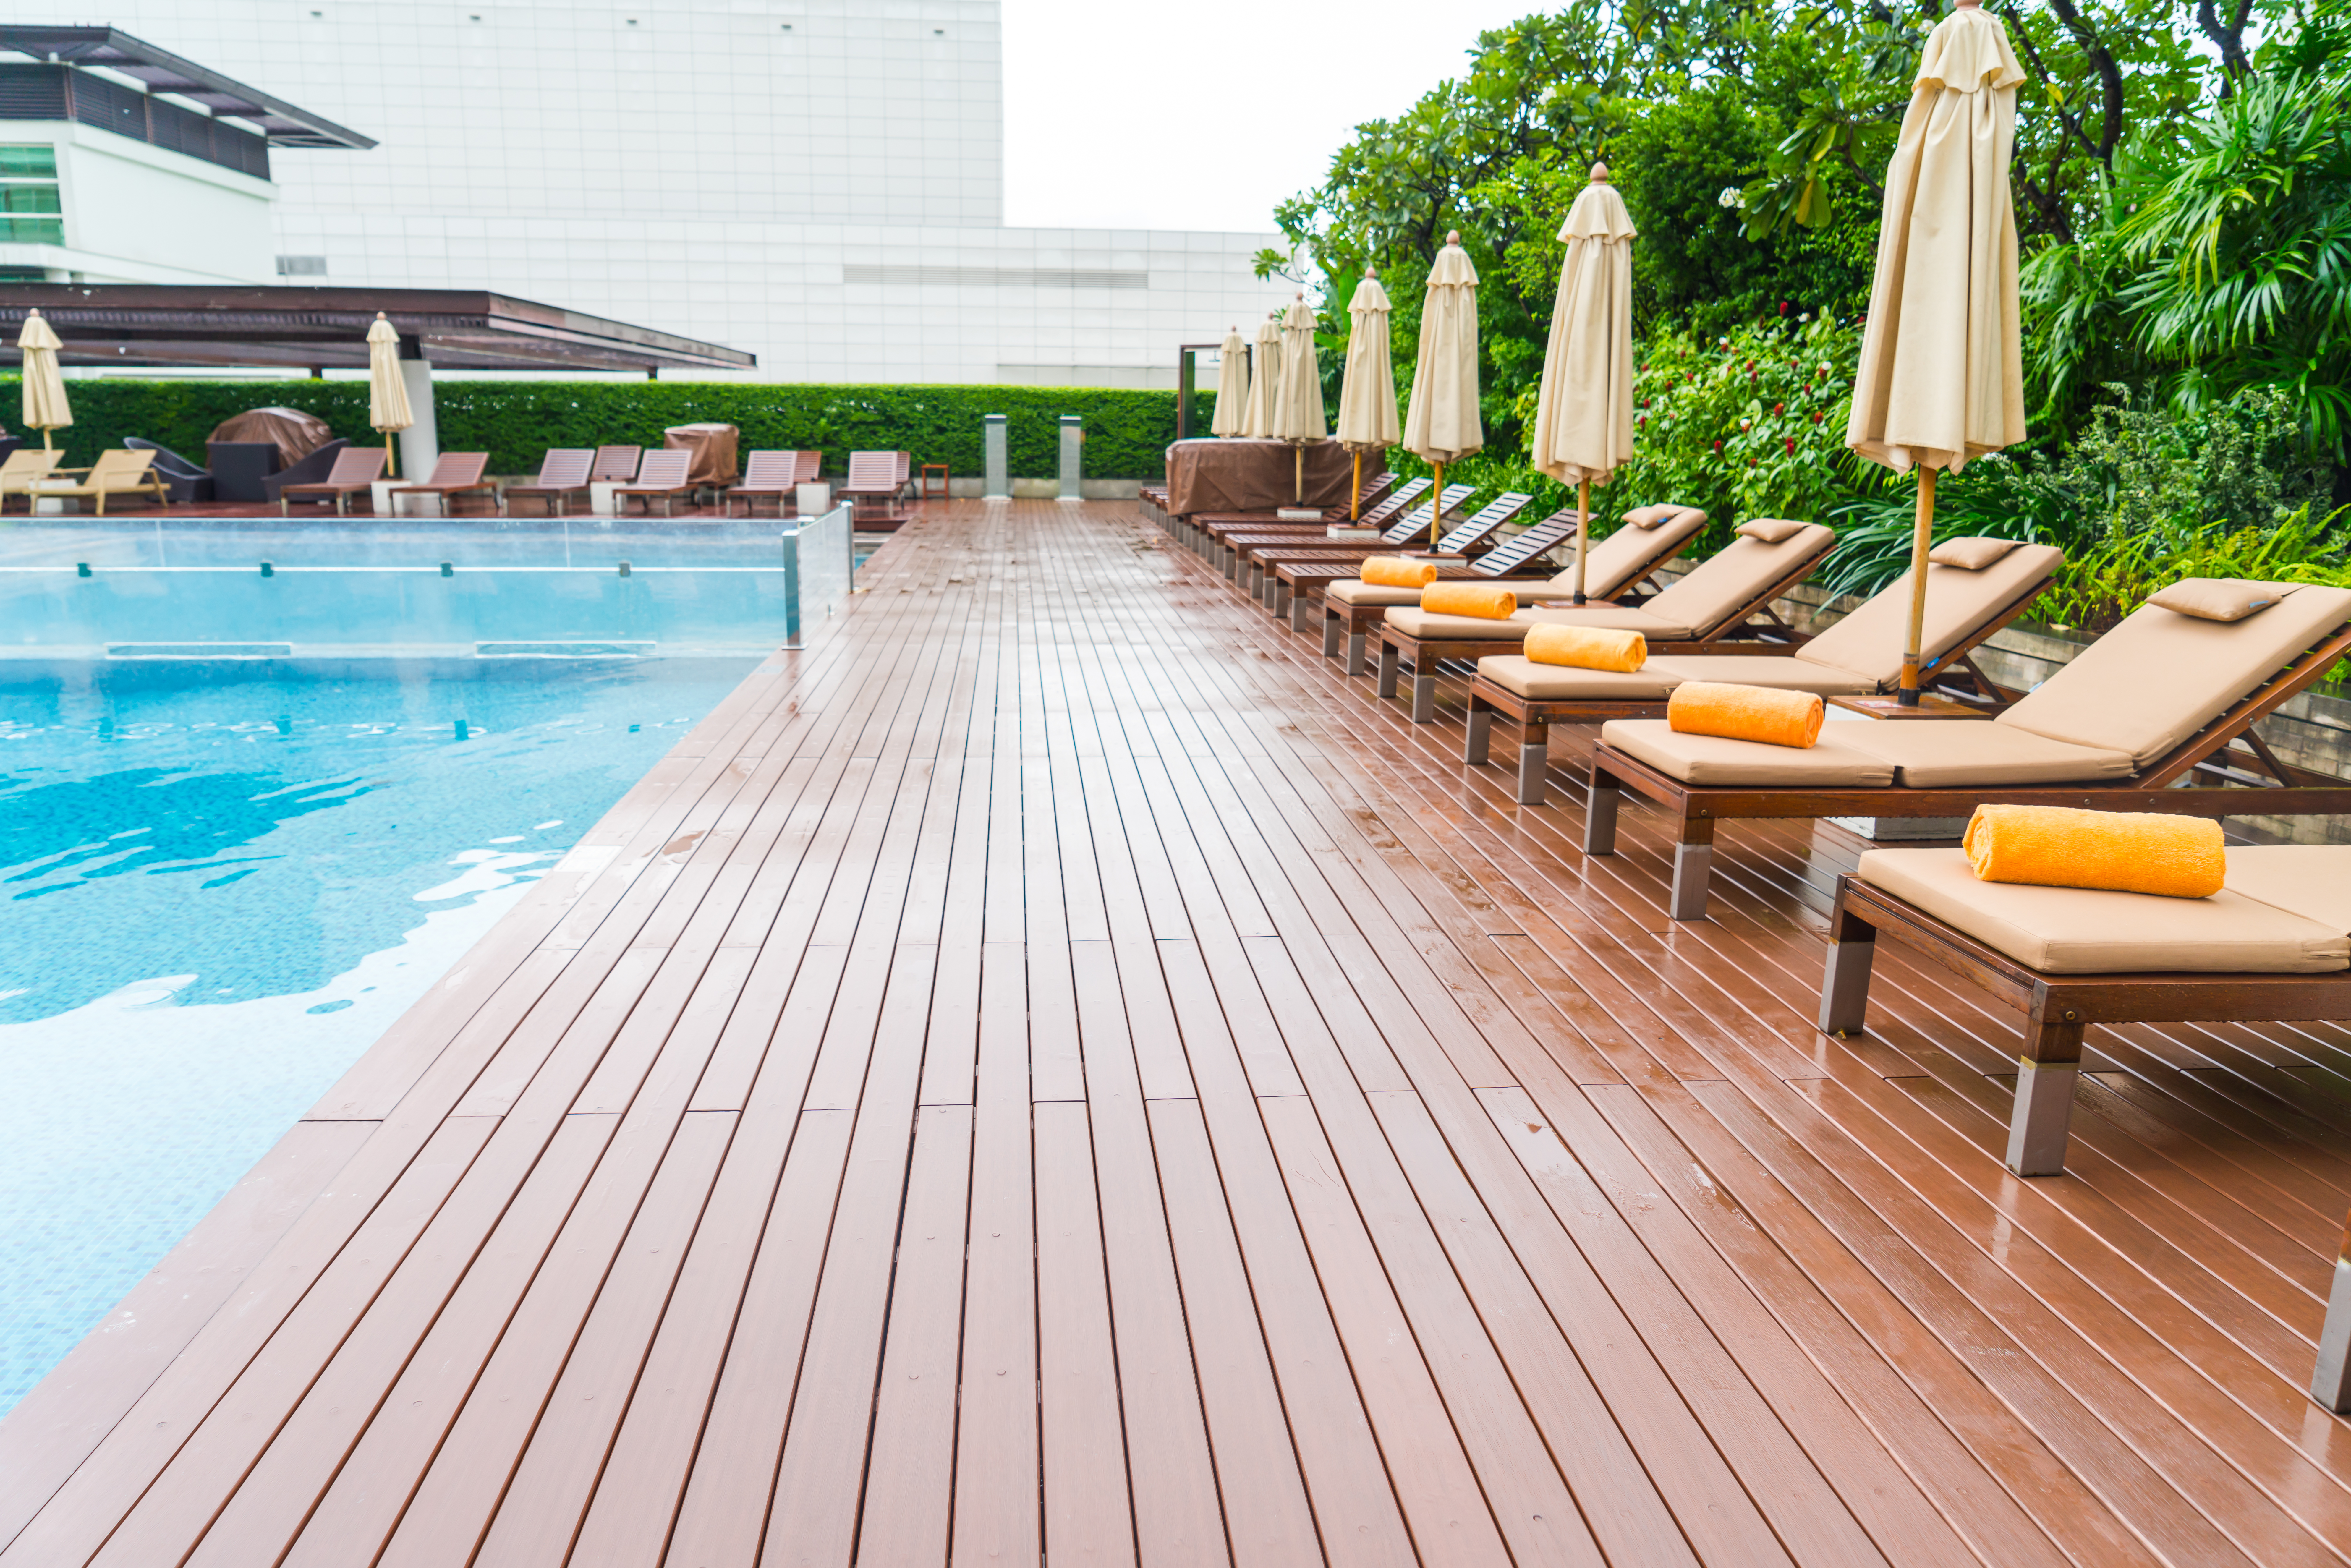 Wooden benches by the poolside, providing comfortable seating for pool-goers to relax and enjoy the outdoor atmosphere.